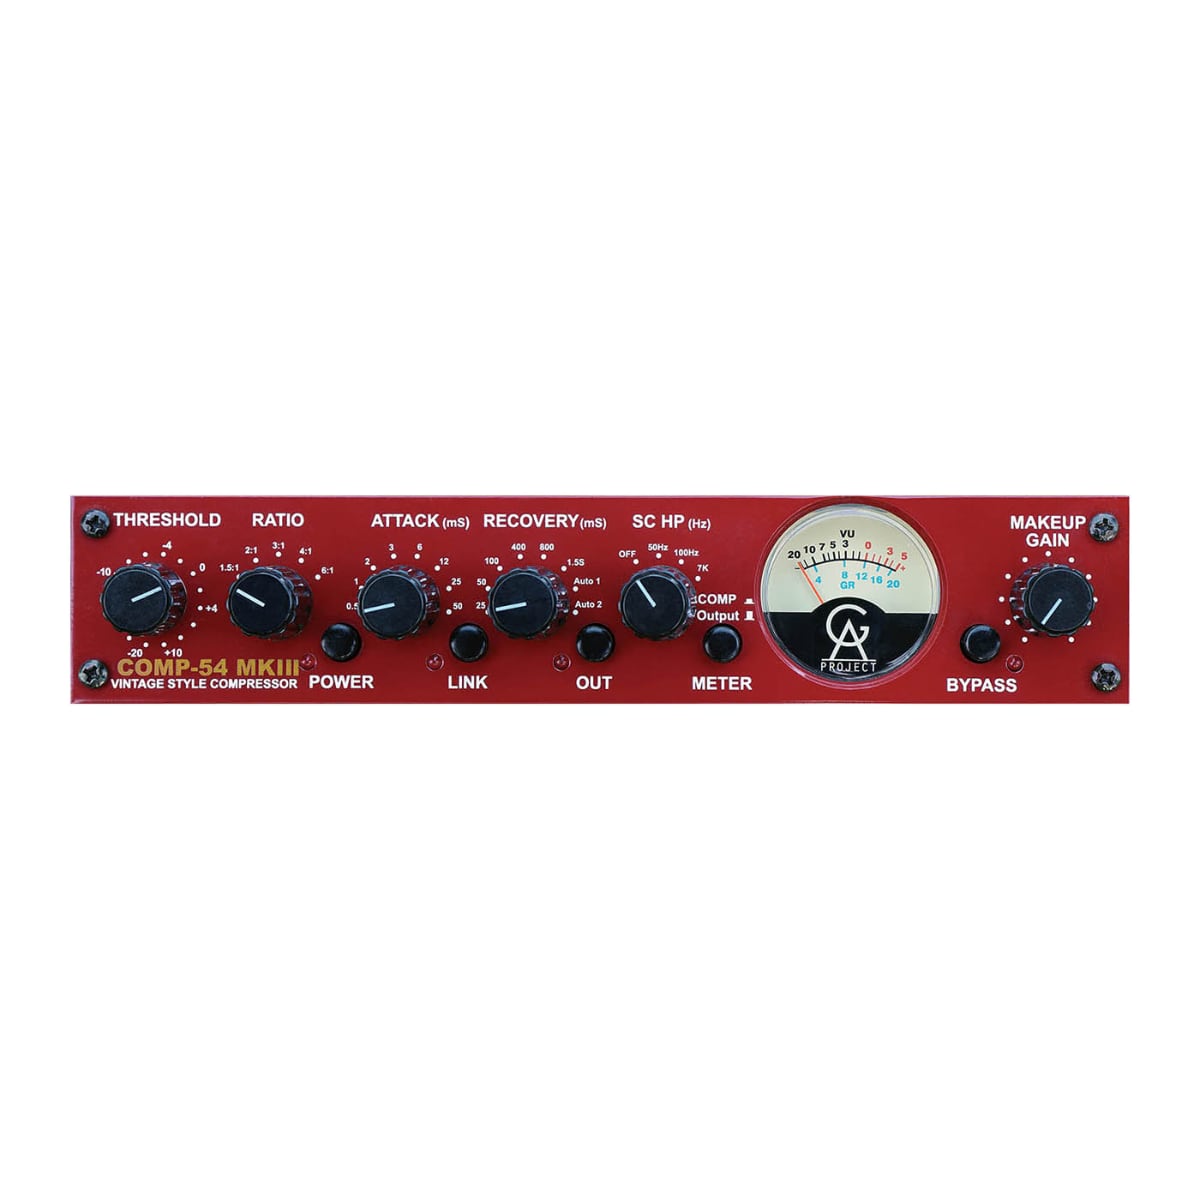 Golden Age Project Comp54 MKIII one-channel vintage style Compressor